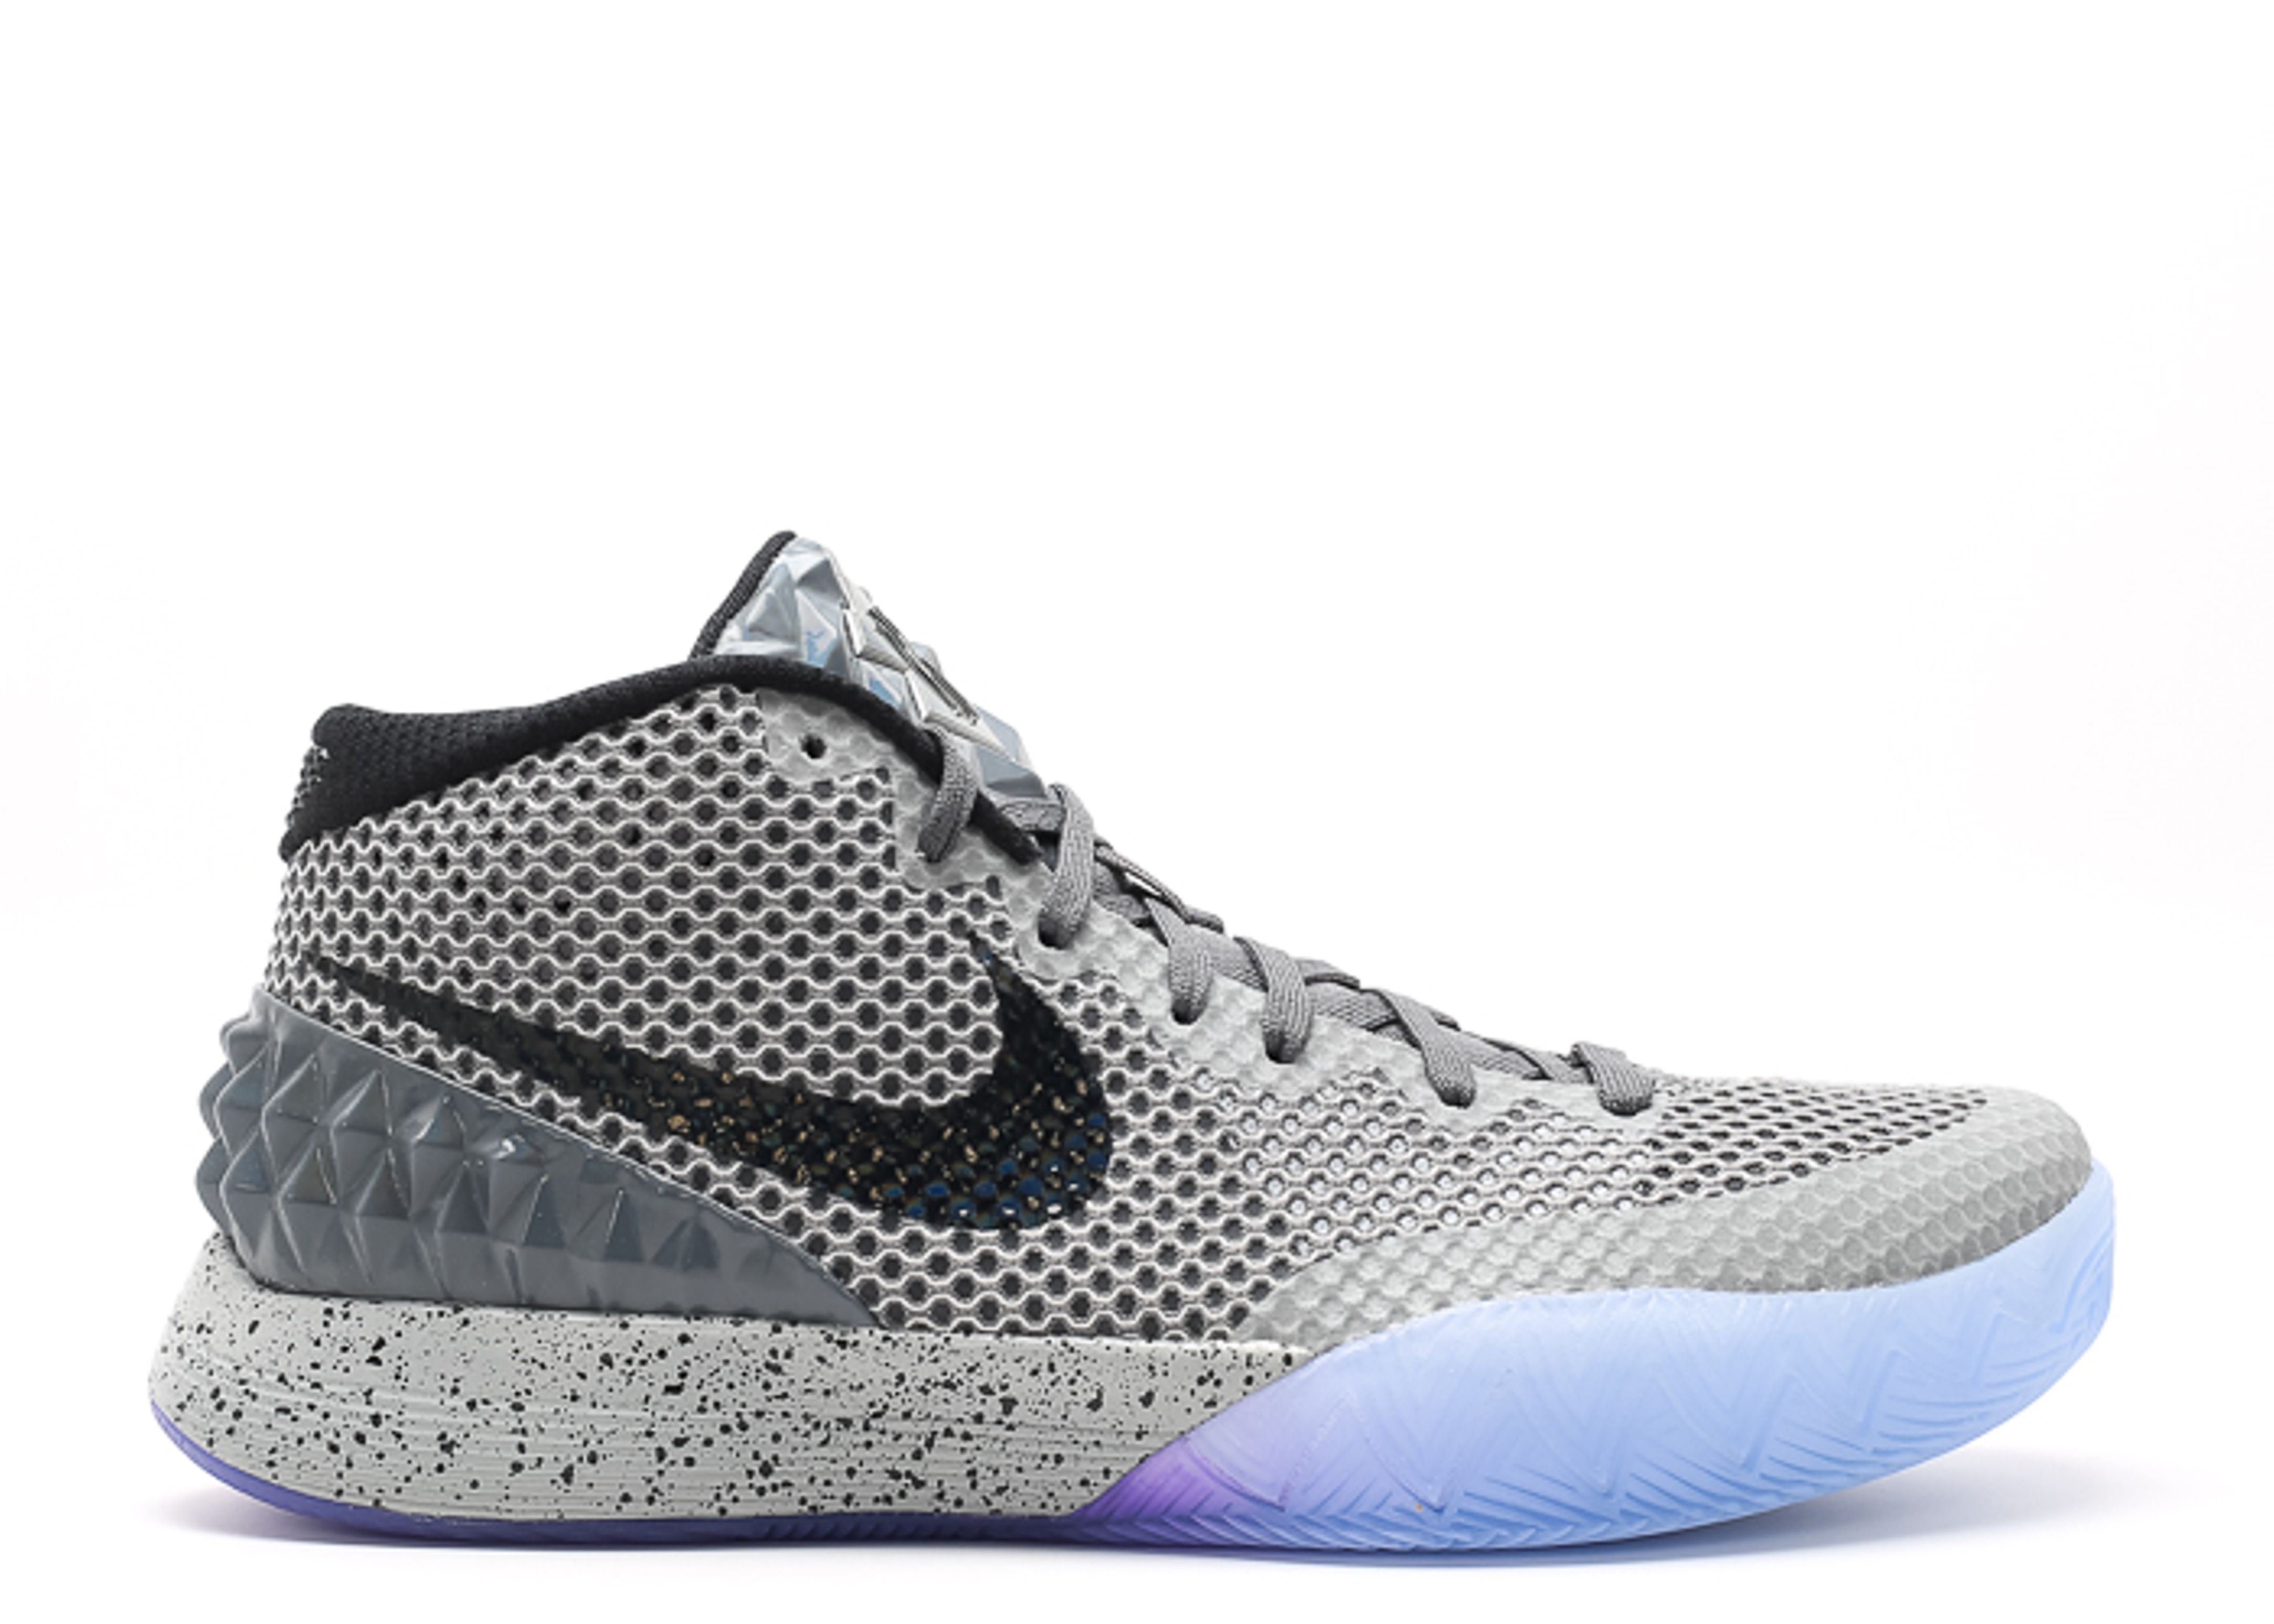 kyrie irving shoes all star 2015